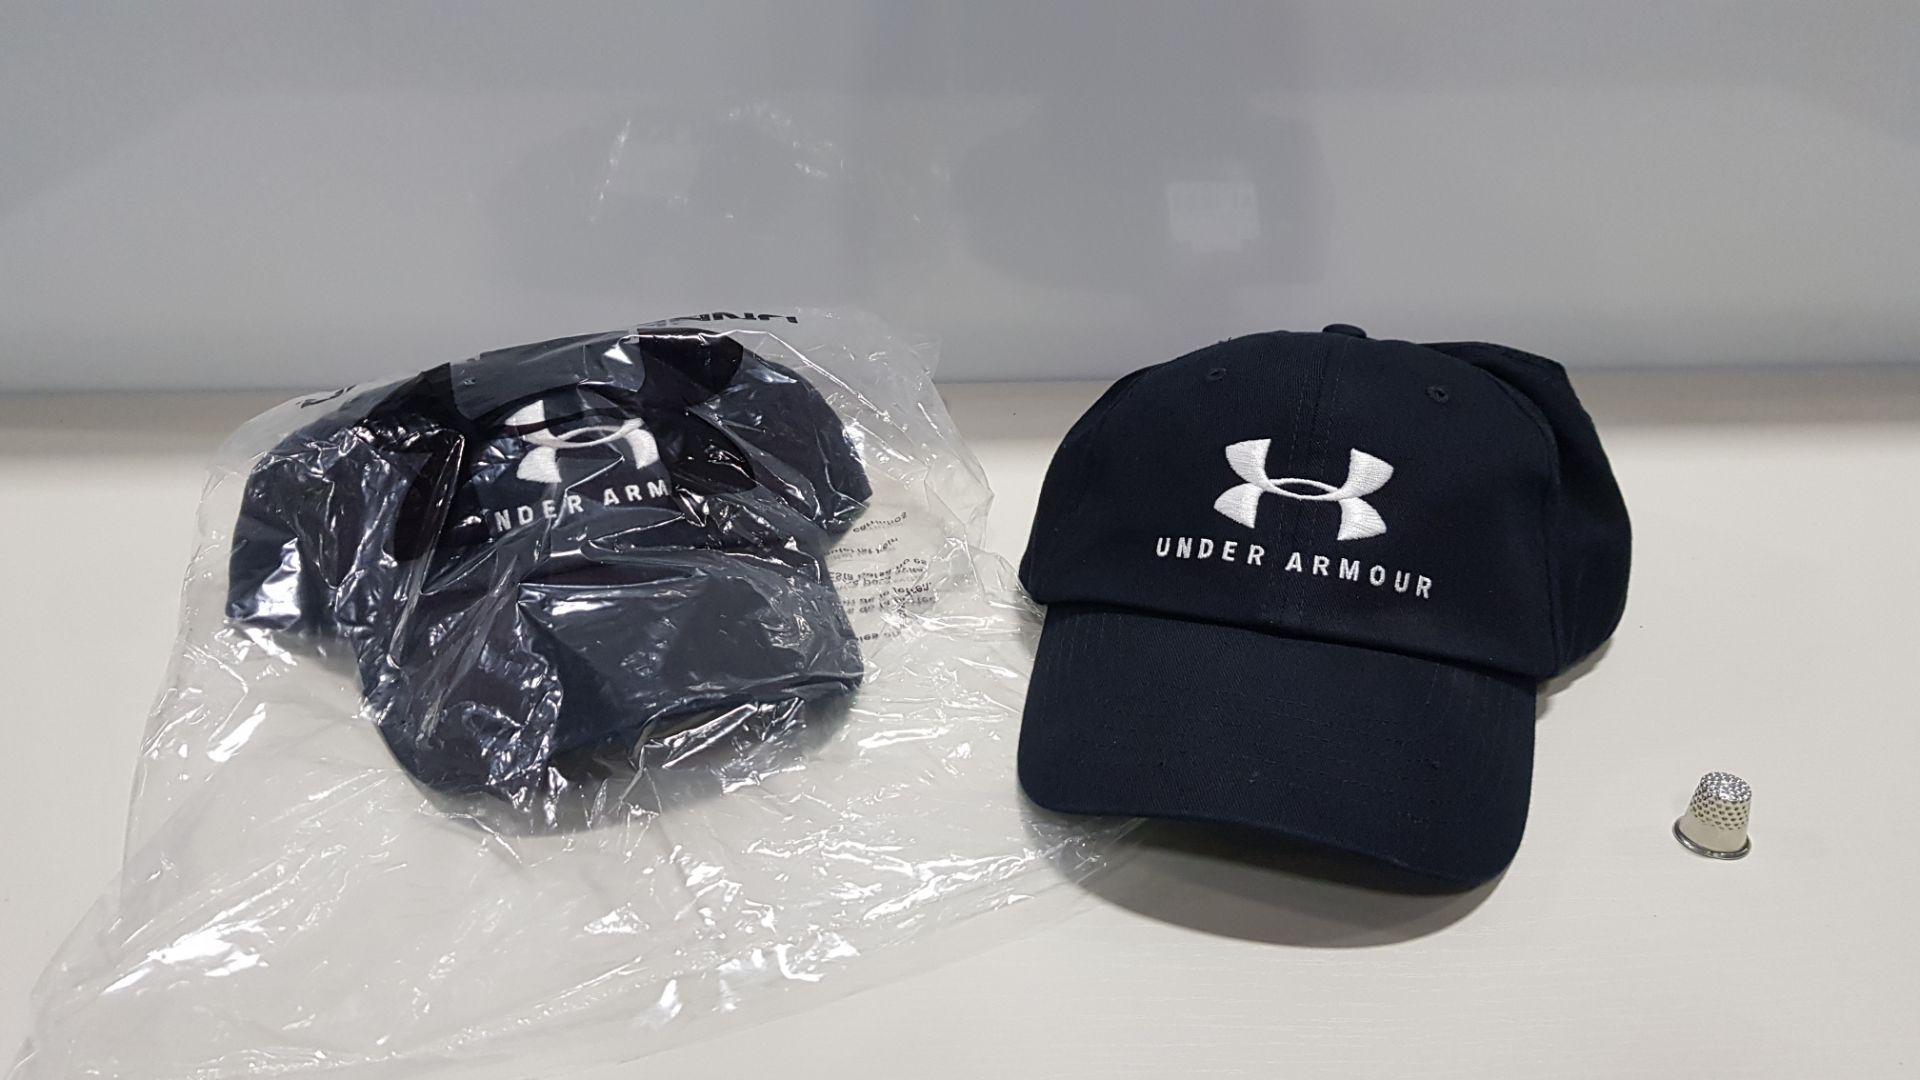 10 X BRAND NEW BAGGED UNDER ARMOUR UA FREE CAPS RRP £17.99